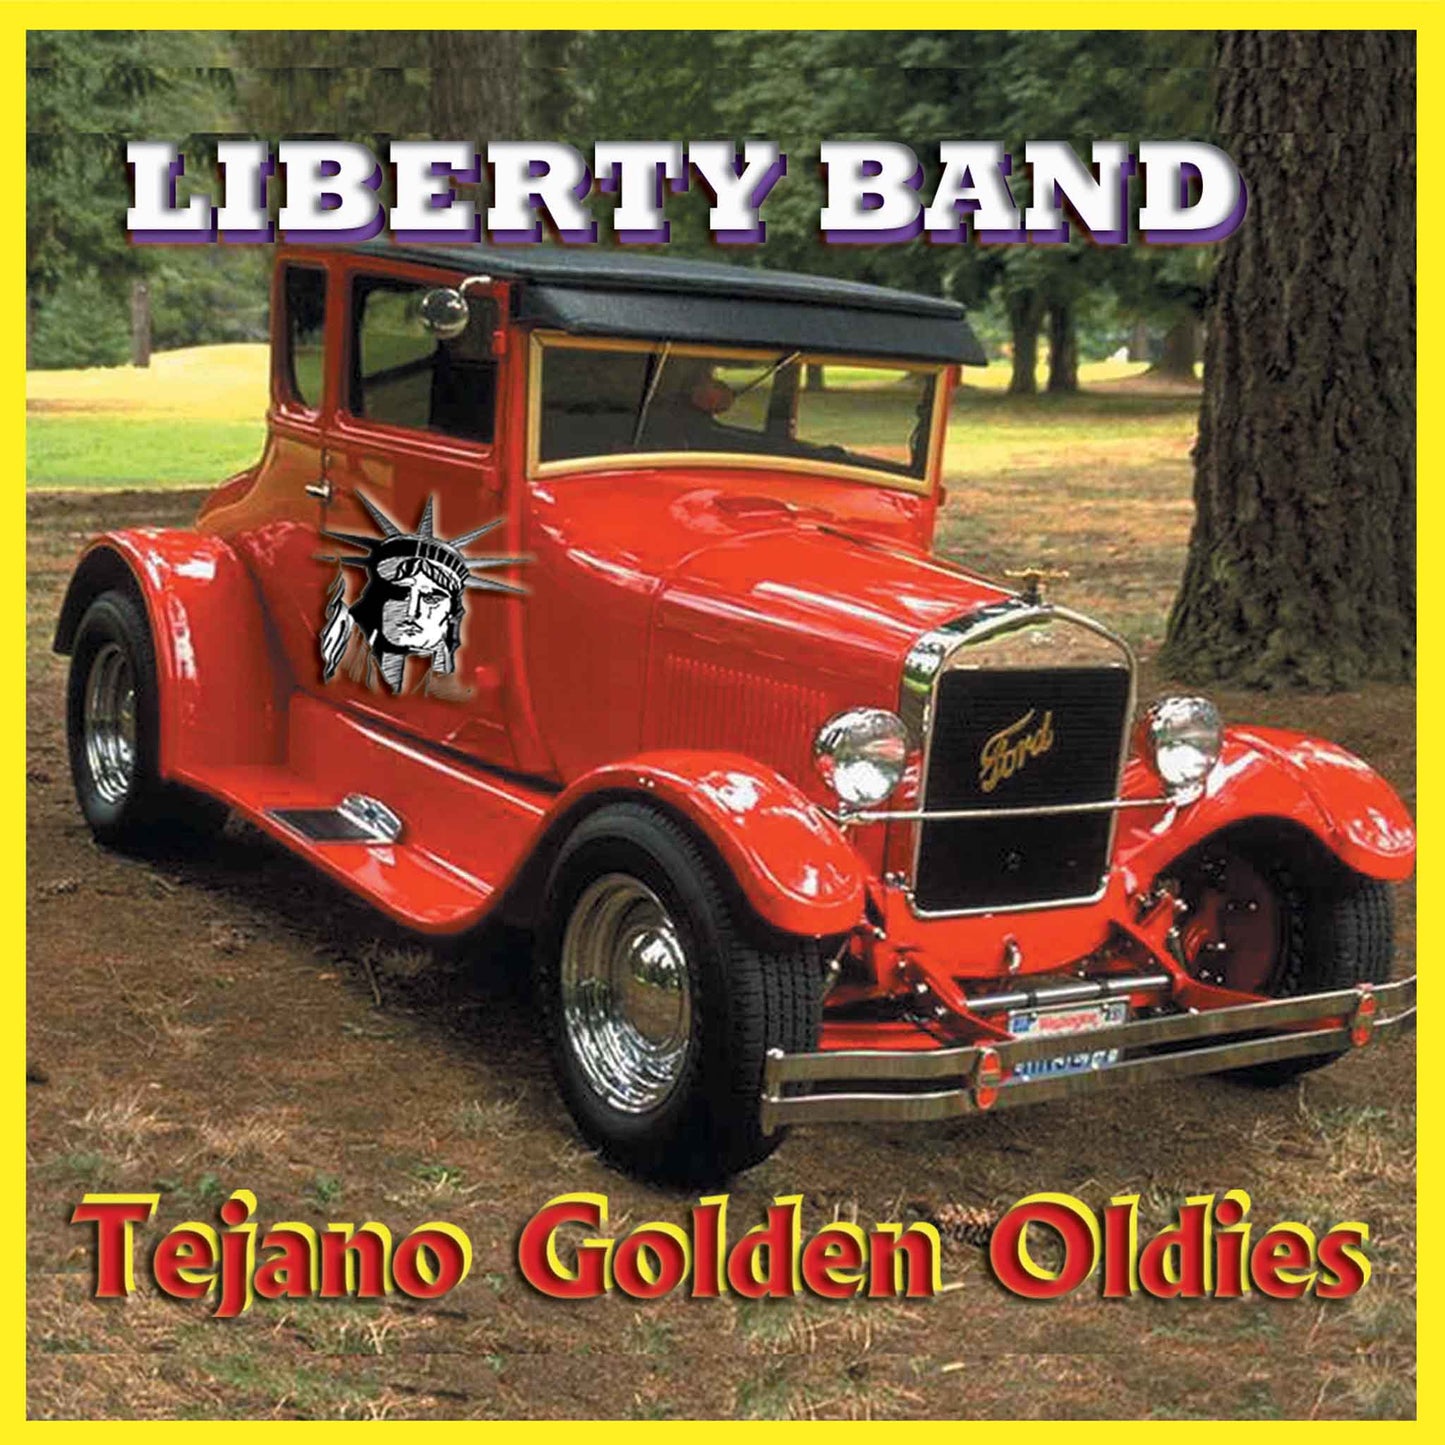 Liberty Band - Tejano Golden Oldies (CD)